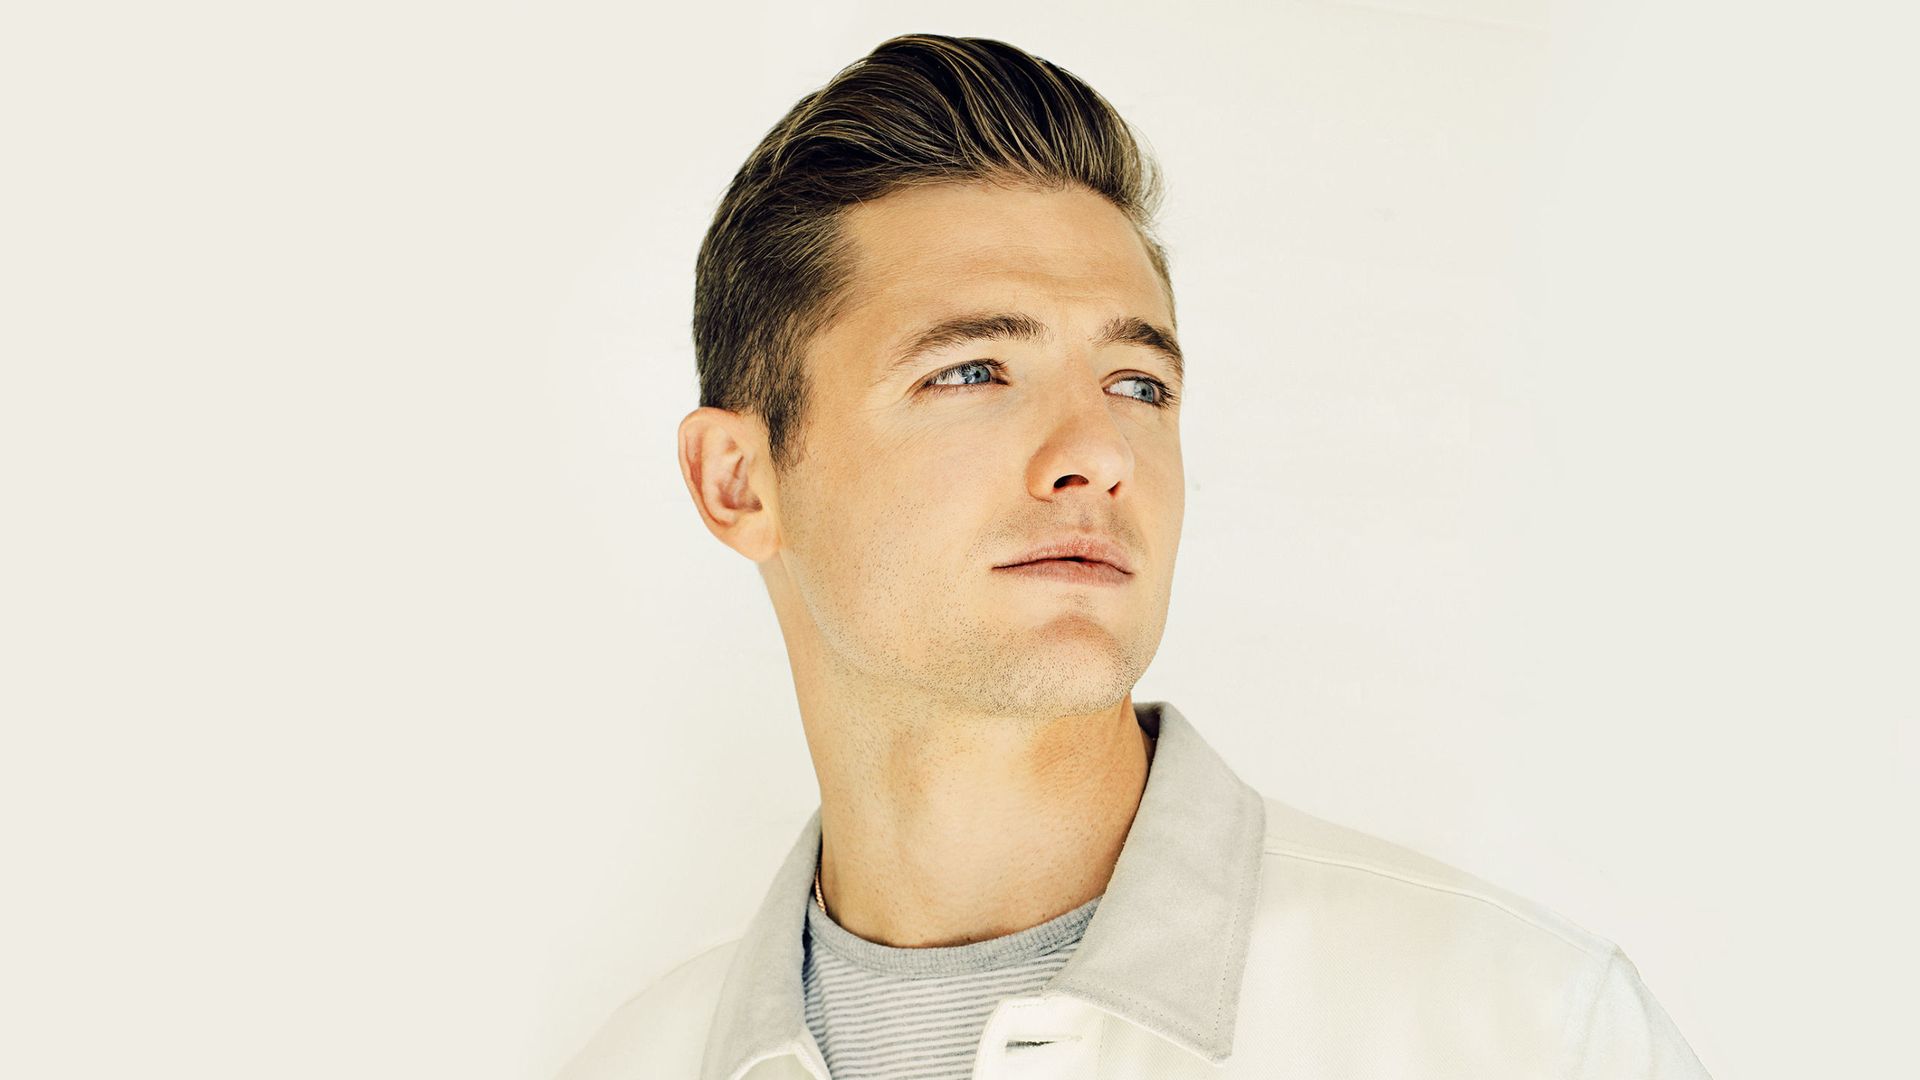 Robbie Rogers Speaks About Being a Gay Athlete